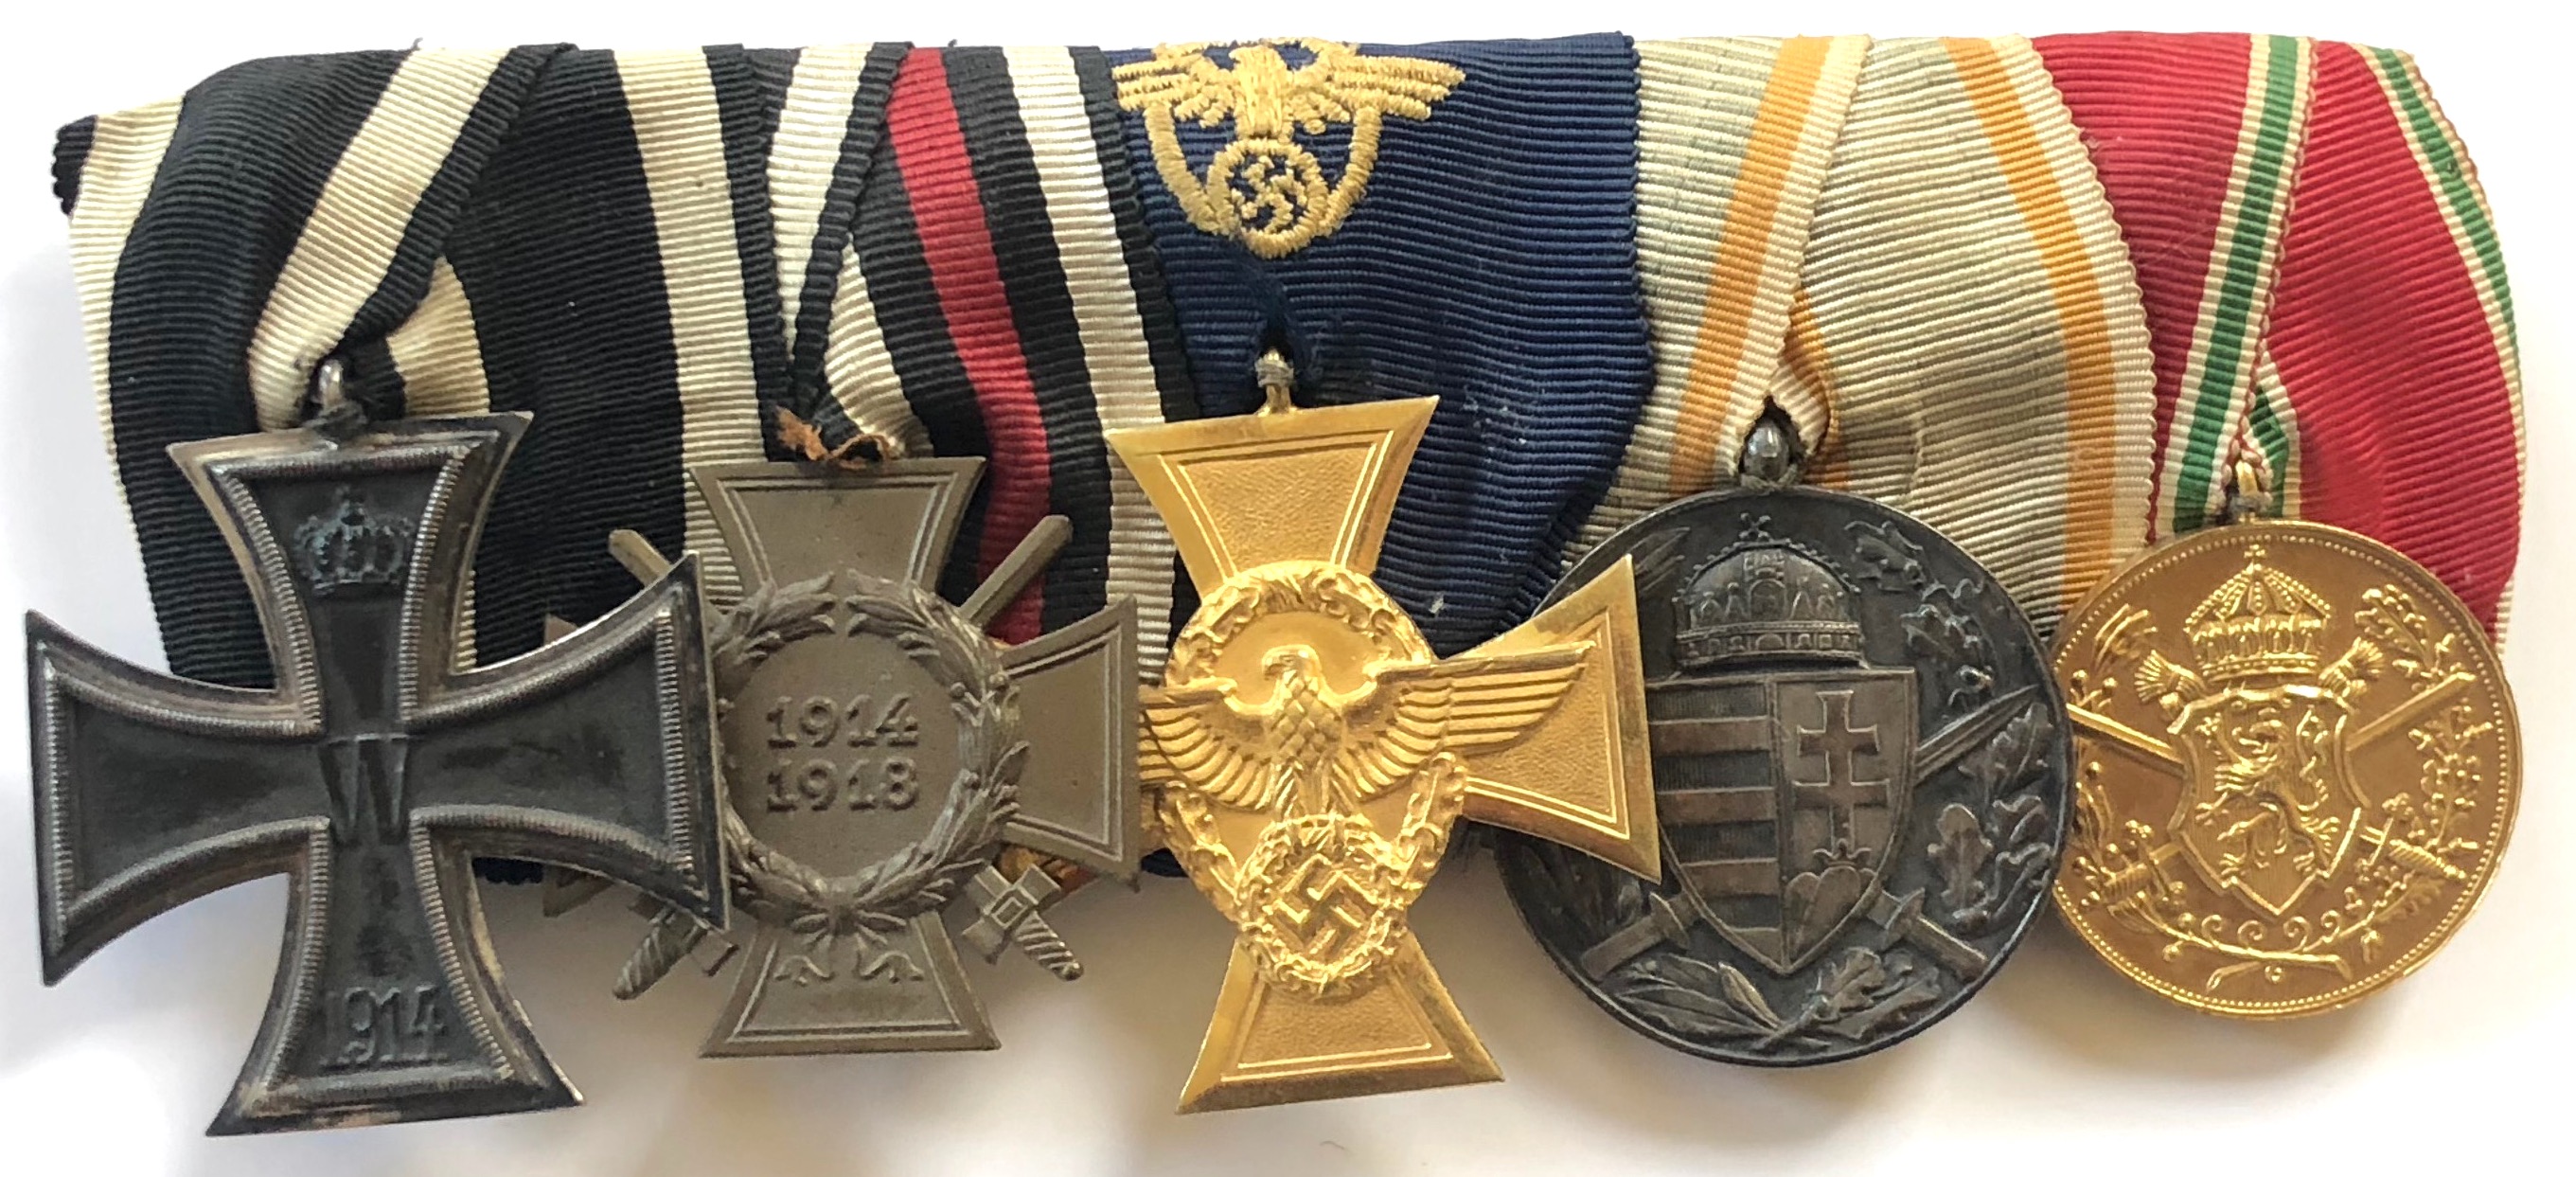 German Imperial and Third Reich 1914 Iron Cross, Police Cross group of five medals. Iron Cross 1914,